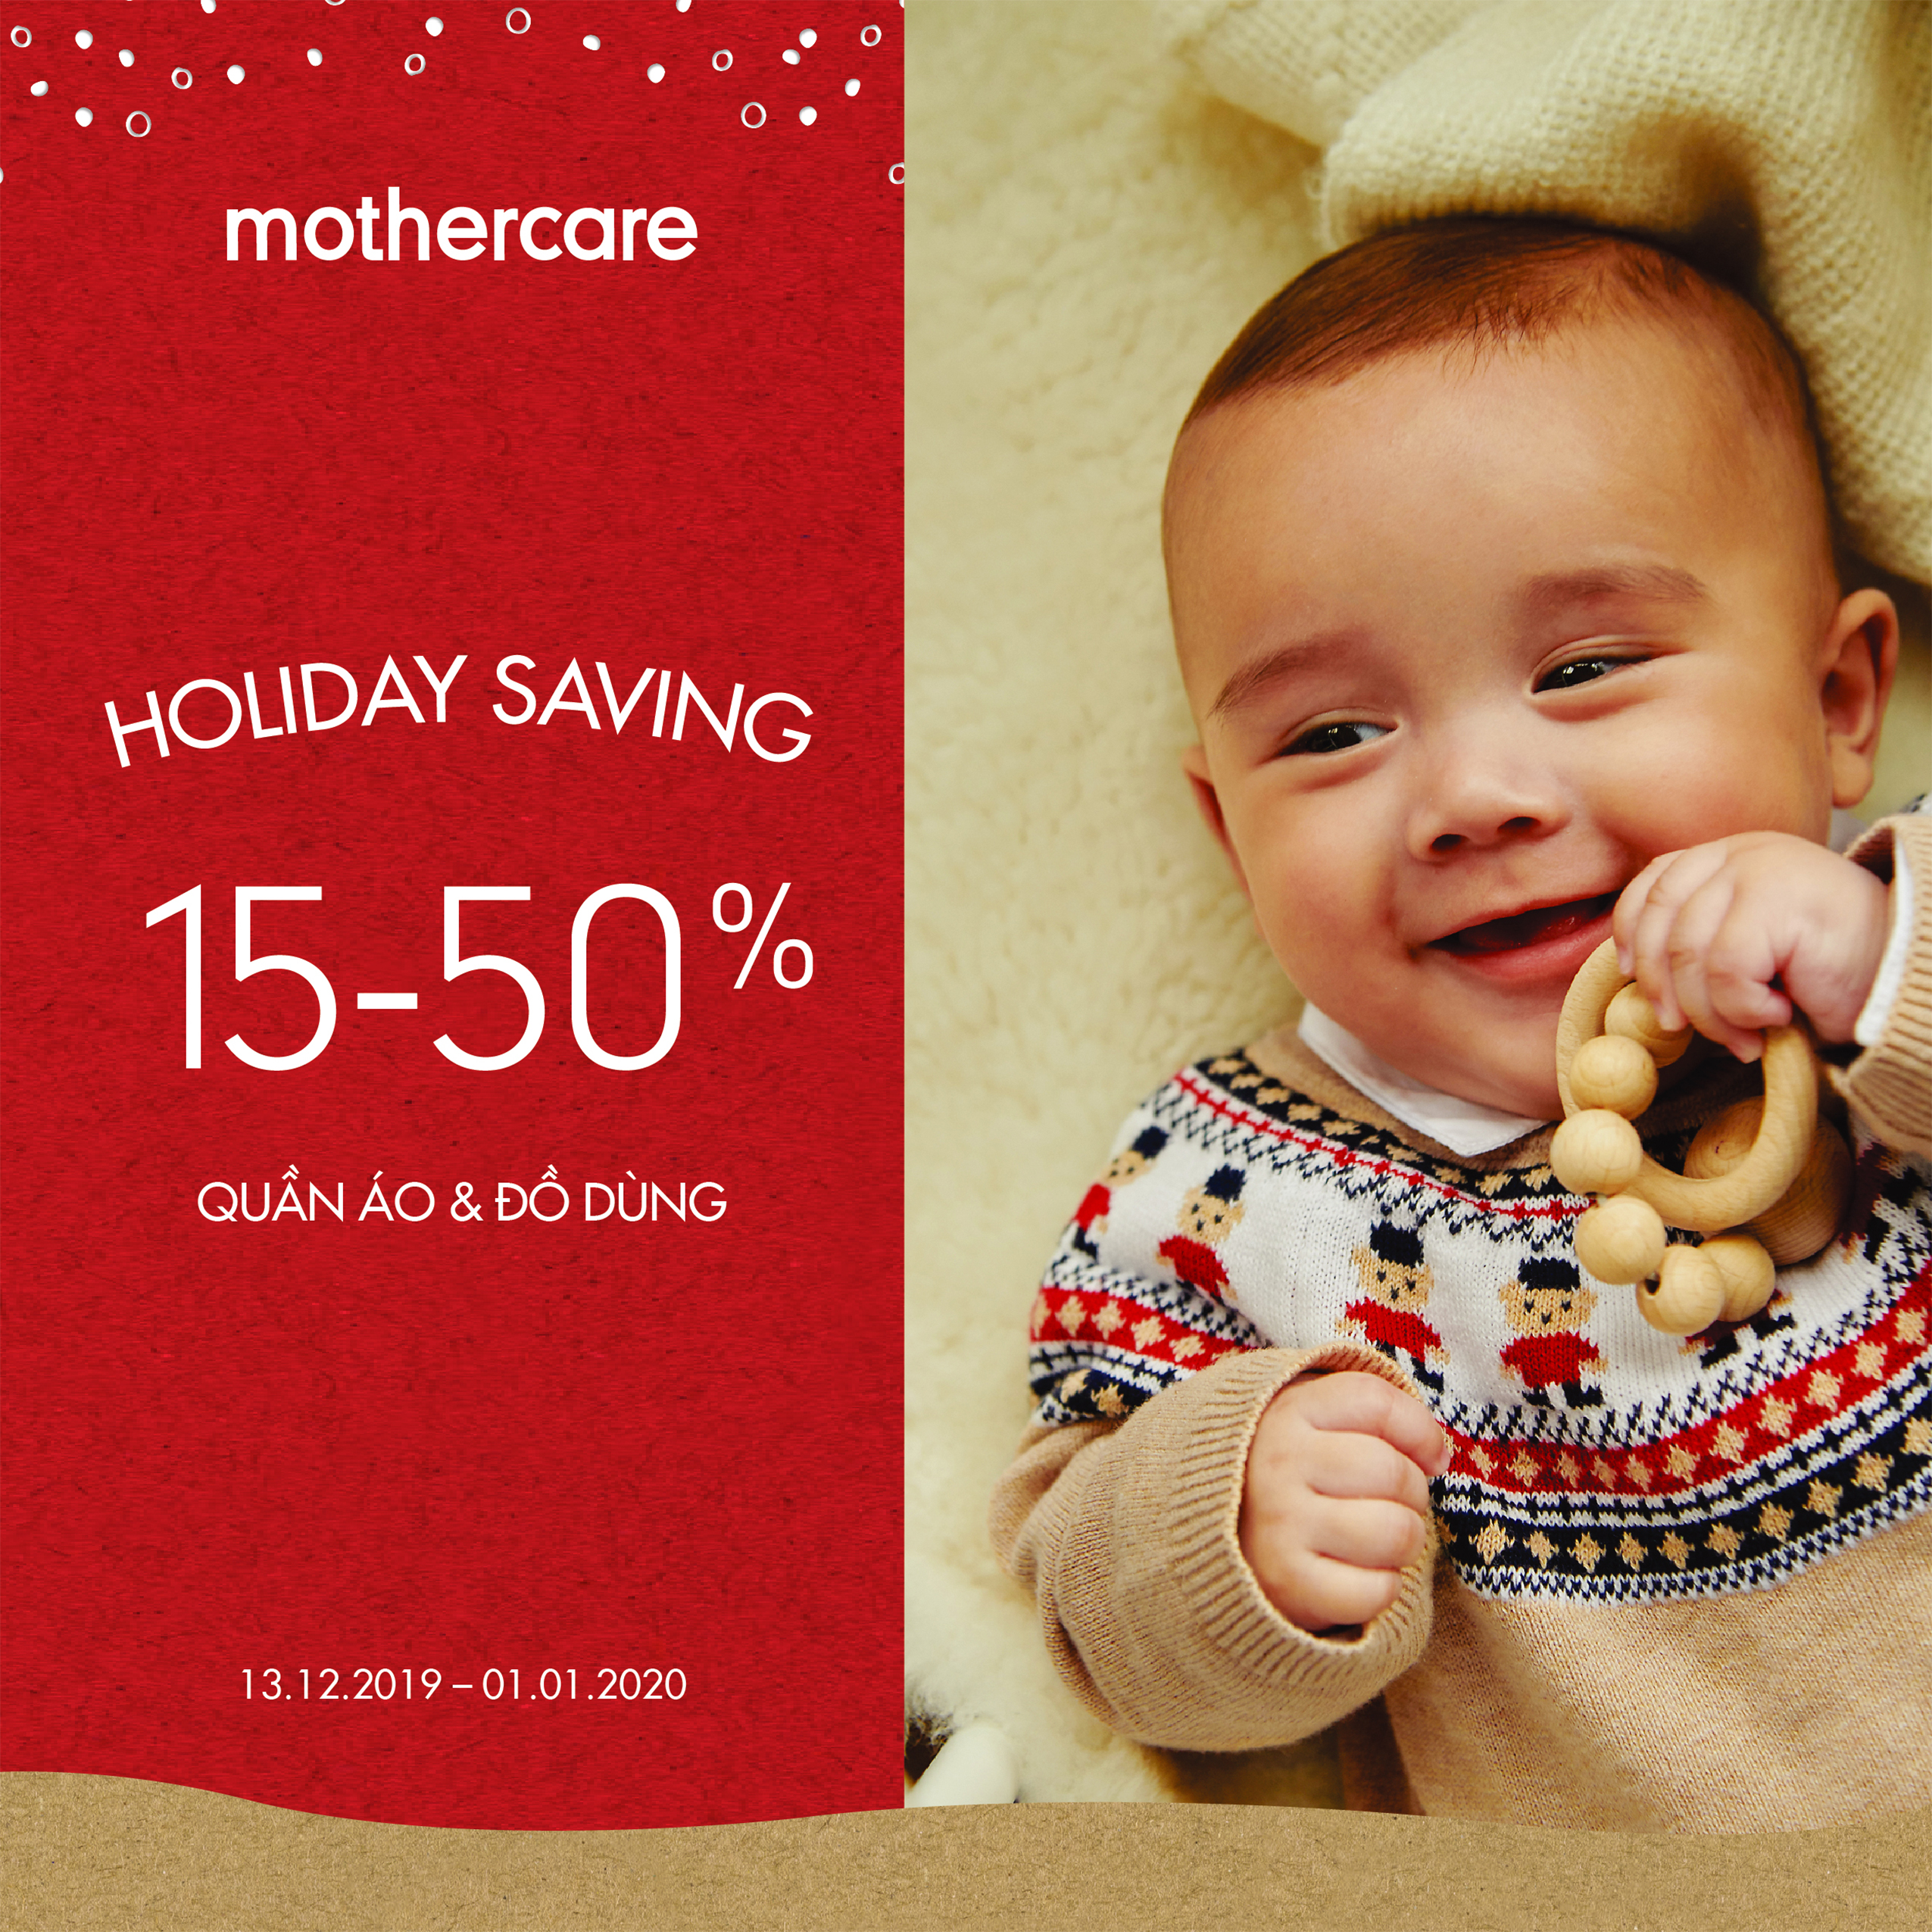 MOTHERCARE - MERRY CHRISTMAS & HAPPY NEW YEAR WITH HOLIDAY SAVING